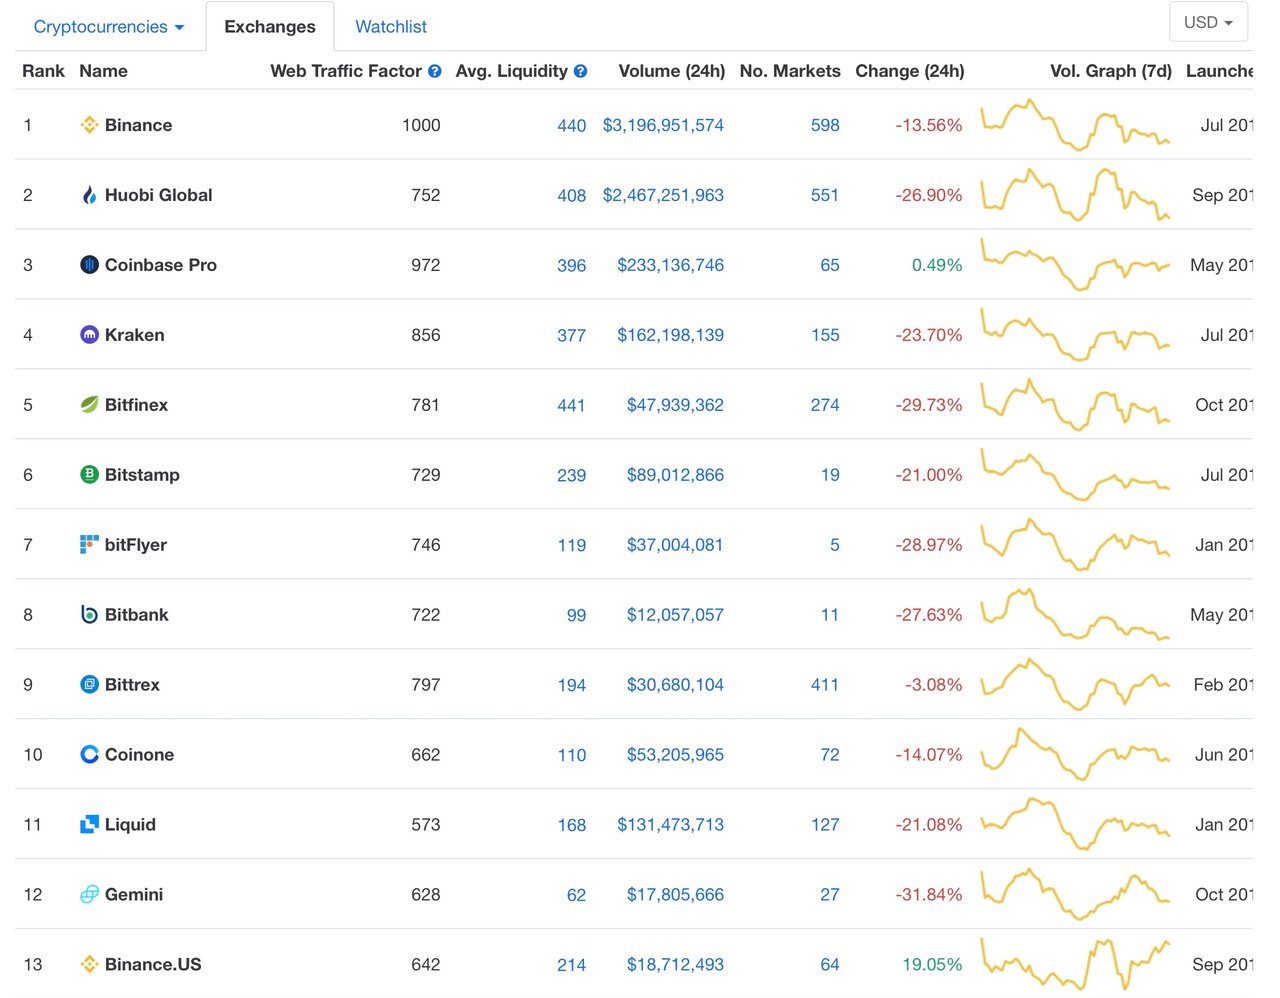 Binance trading volume and controversial CMC ranking ...